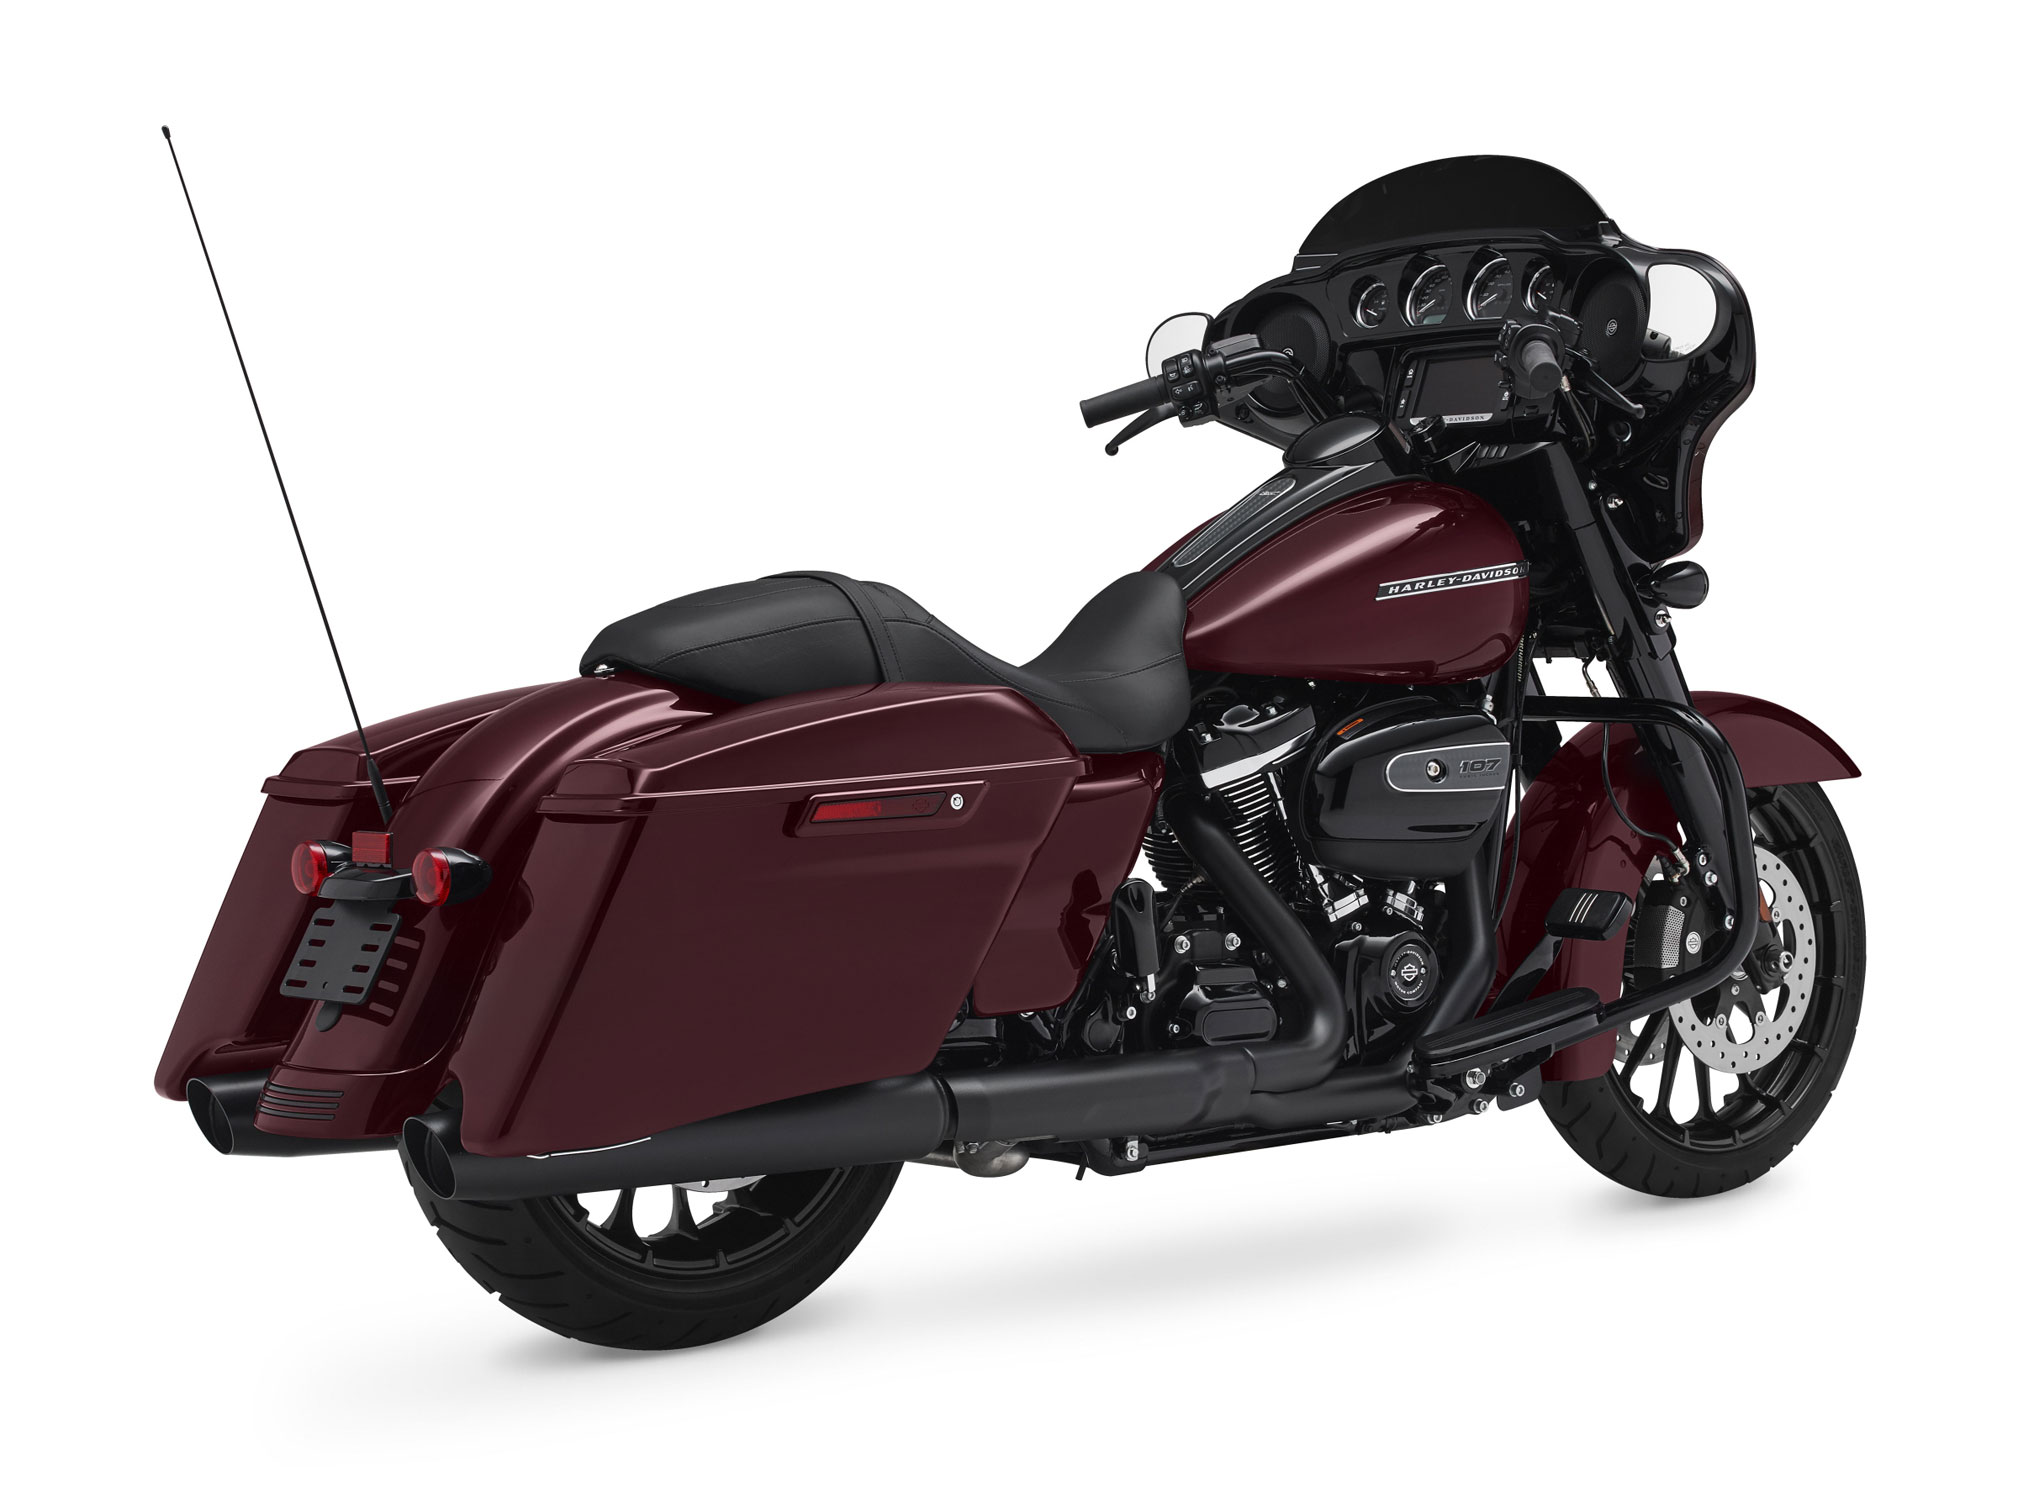 2018 Harley Davidson Street Glide Special Review Total Motorcycle